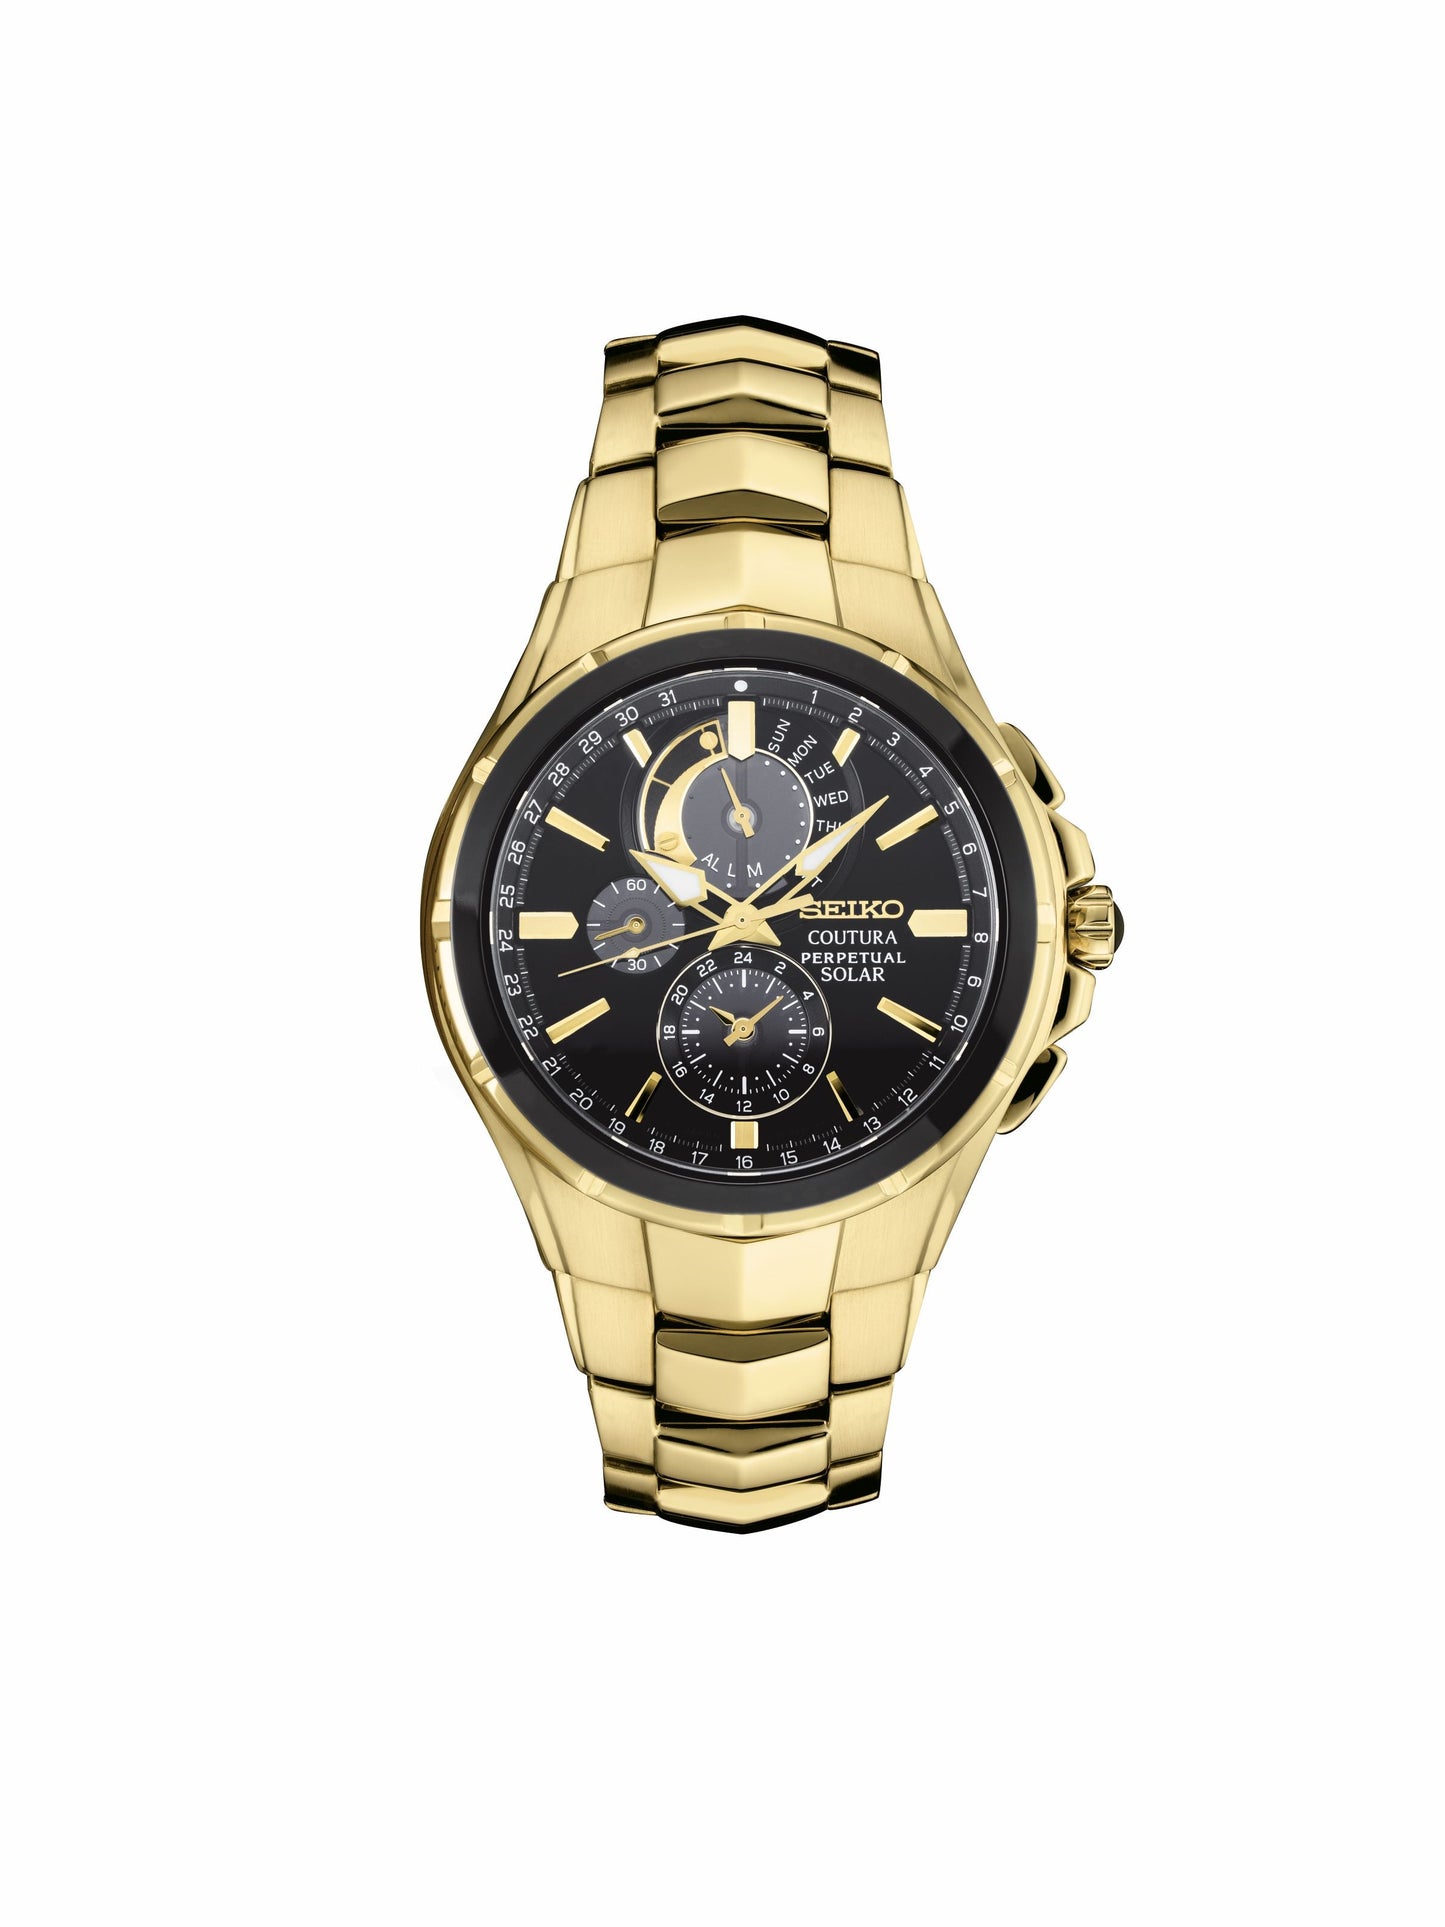 Seiko Coutura Solar Chronograph Stainless Steel Male Watch